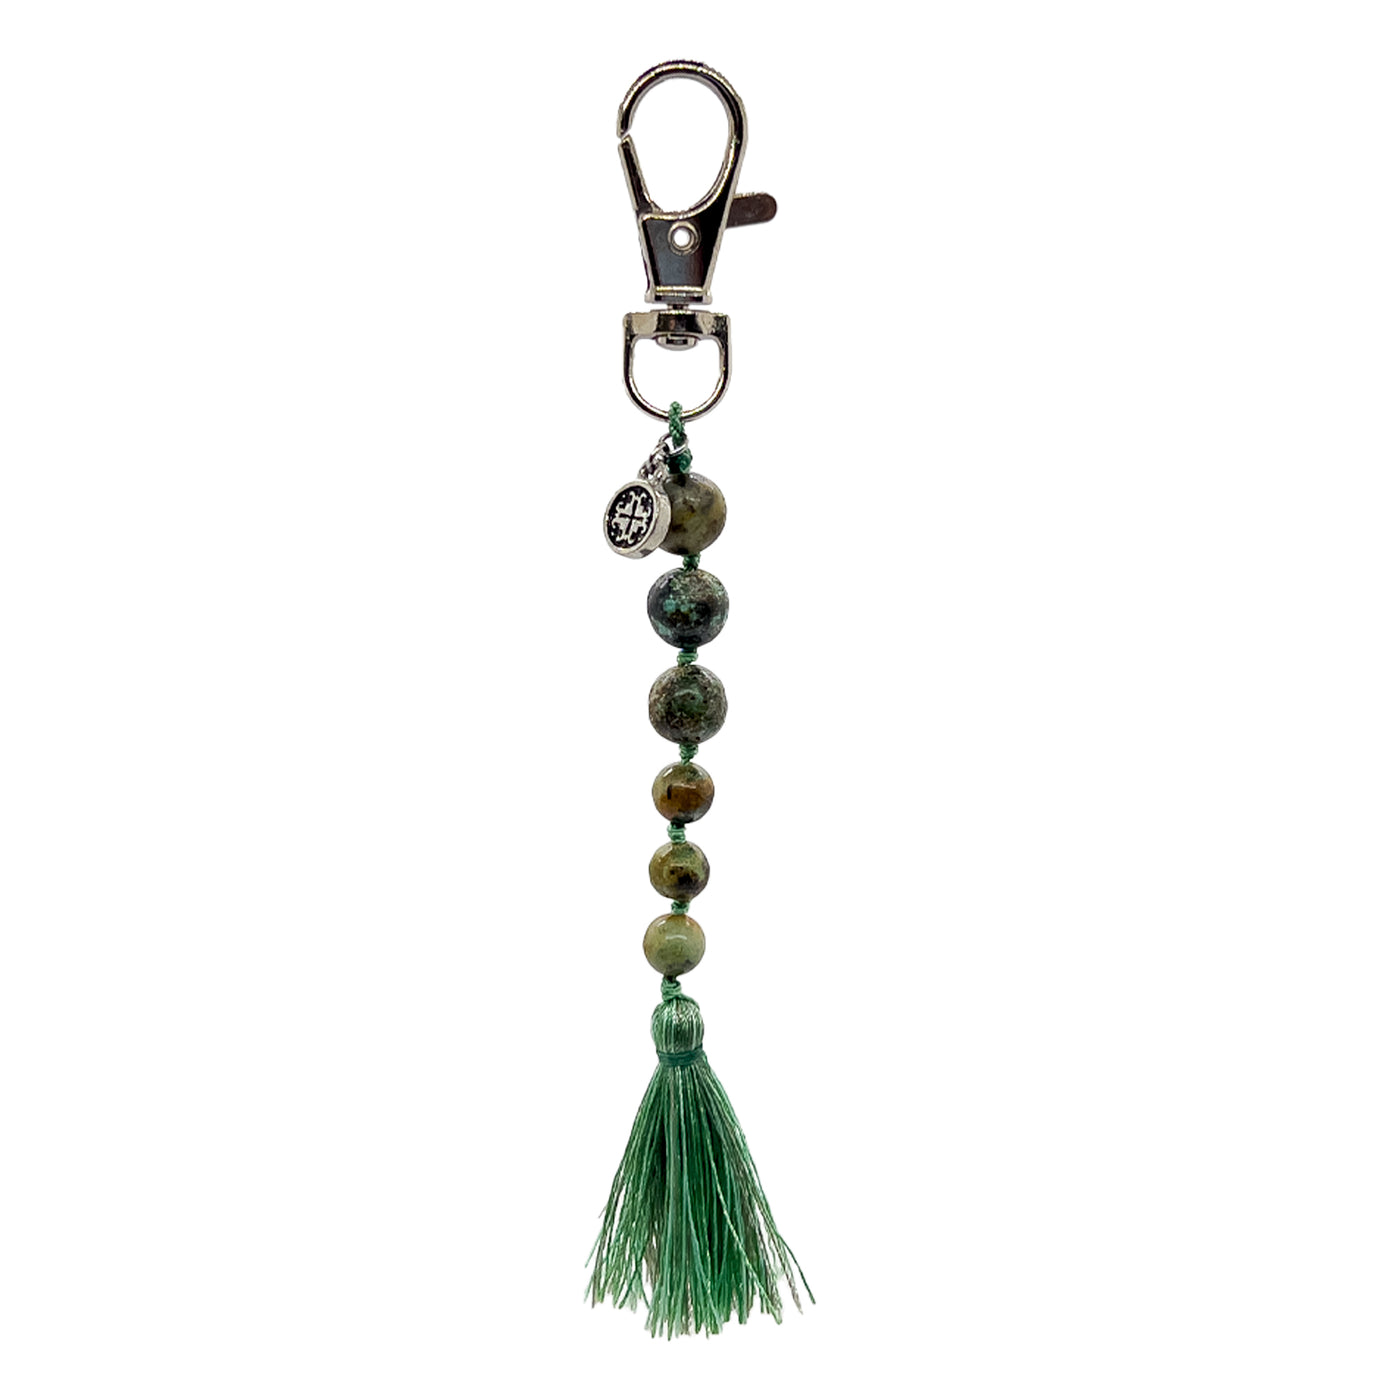 EVOLUTION: African Turquoise Bag Charm